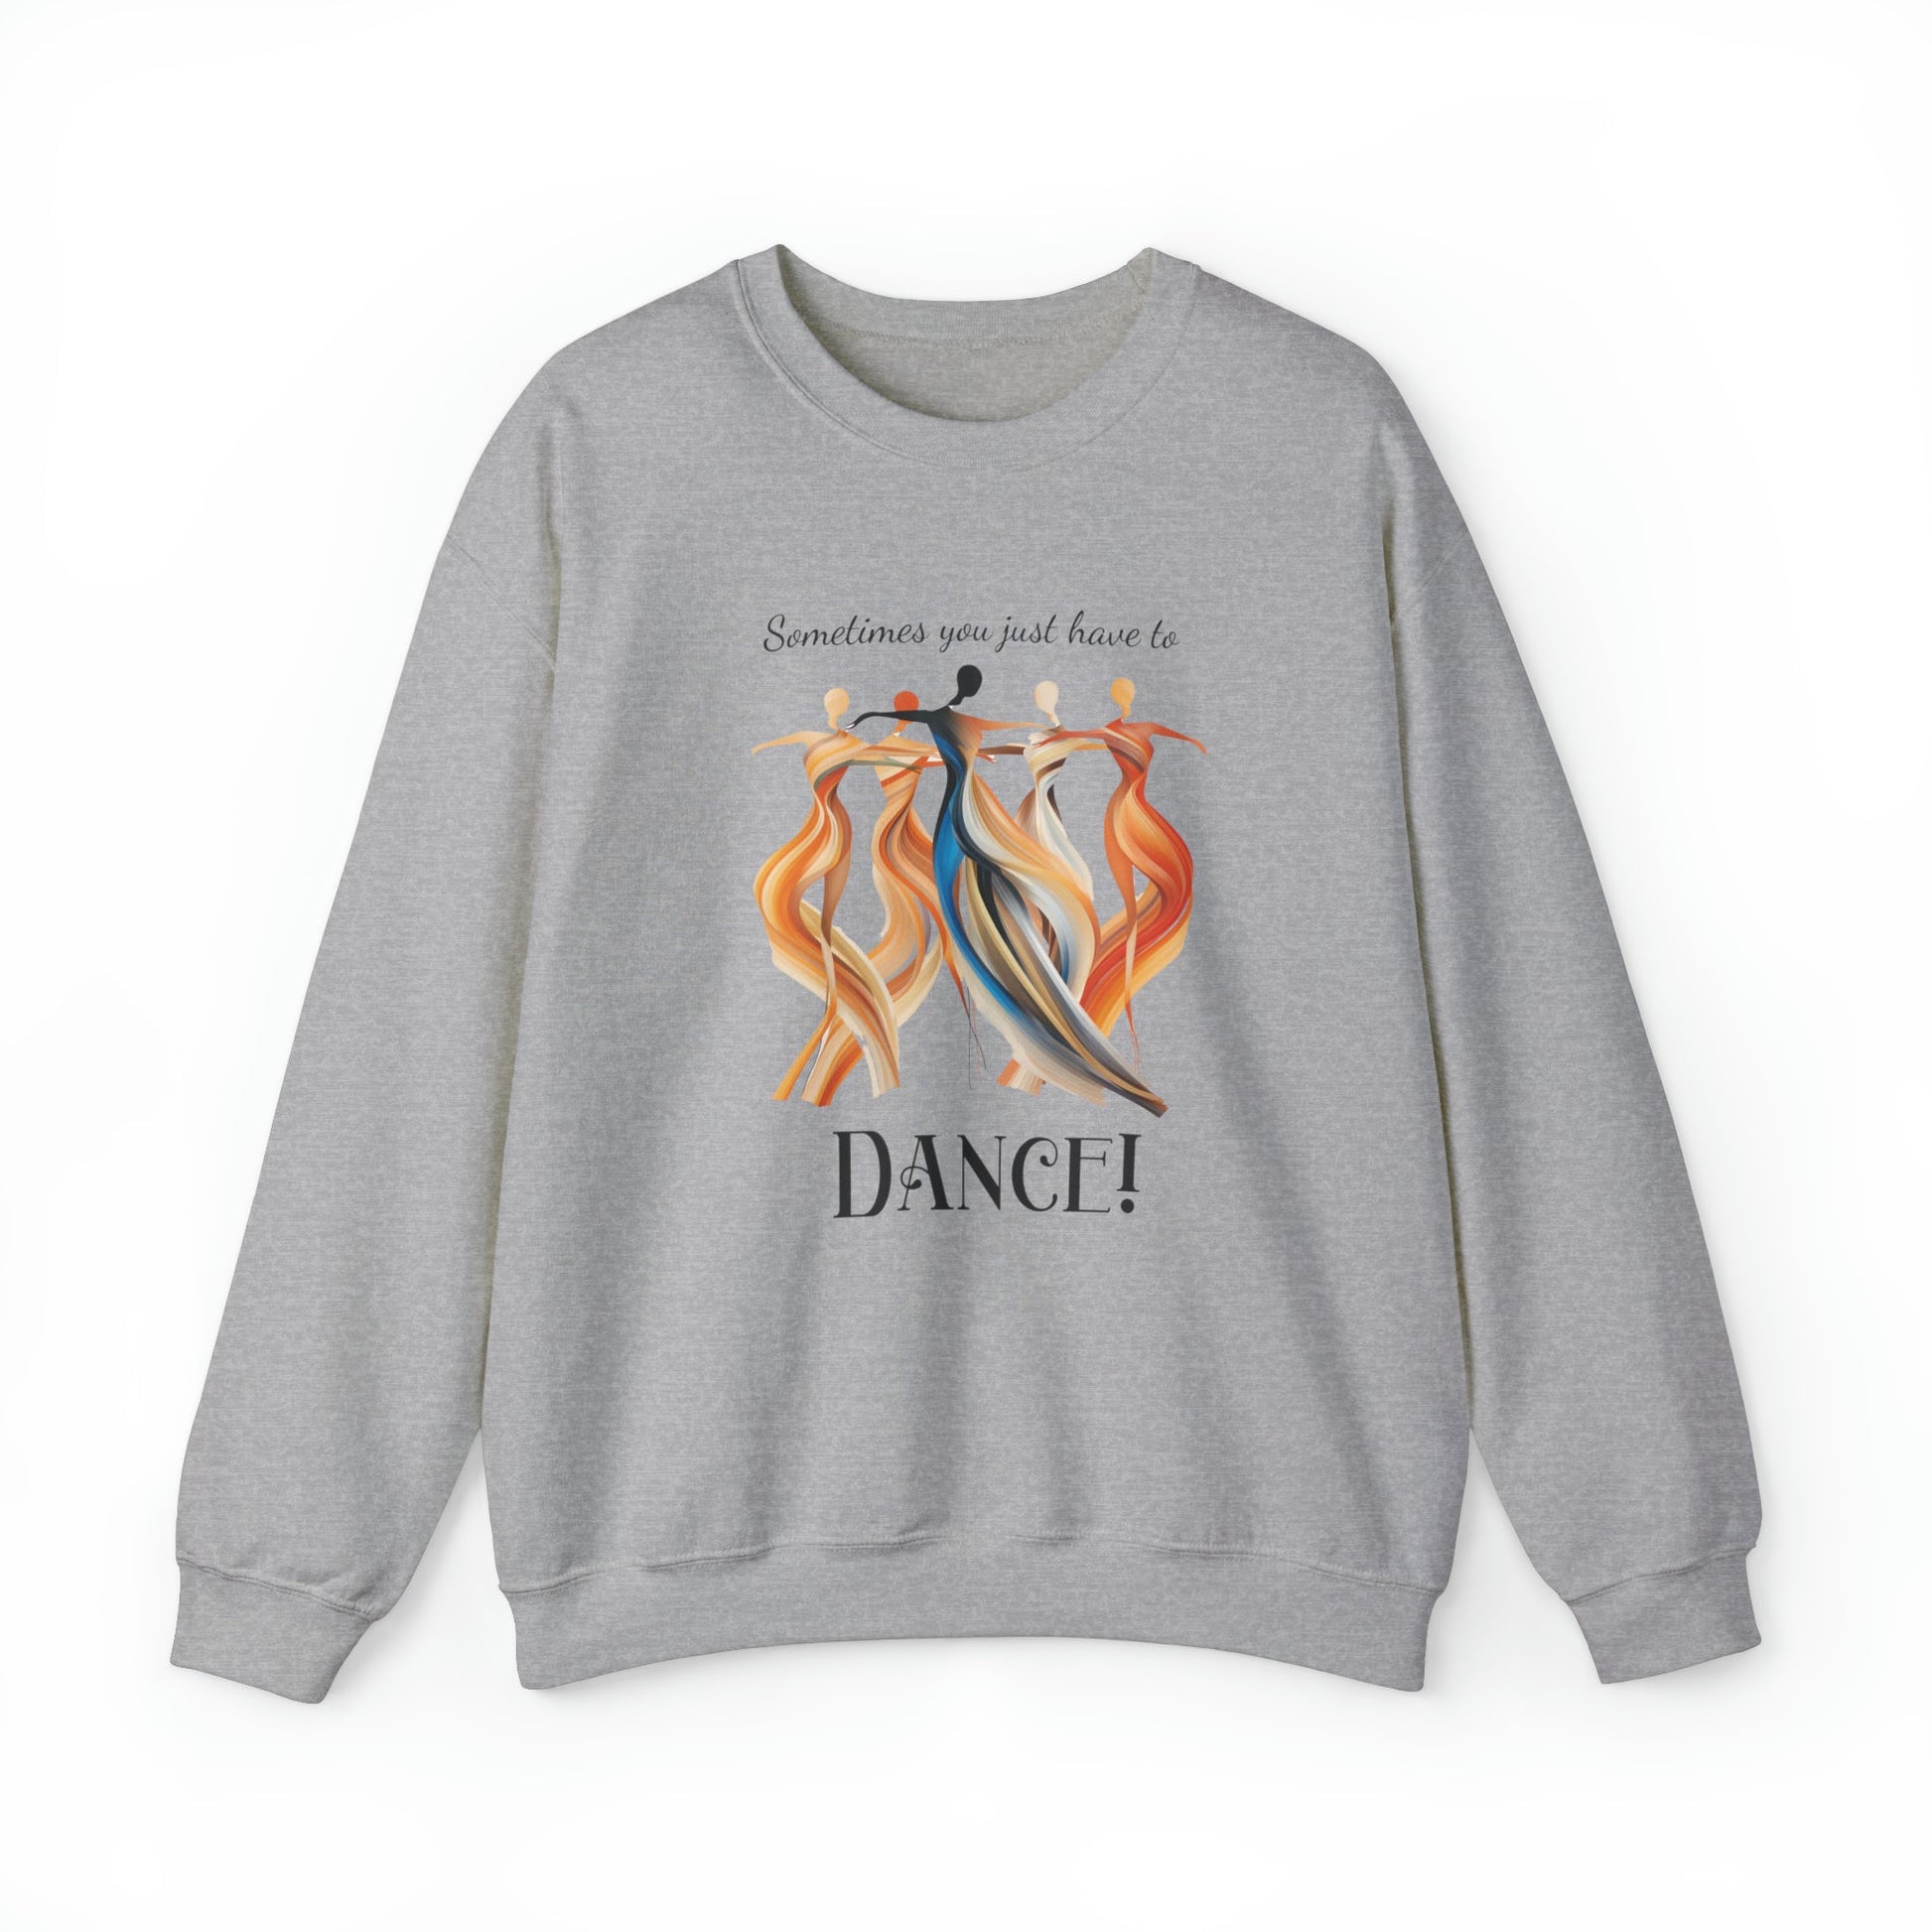 Love of Dance Sweatshirt - Sometimes You Just Have to Dance! Sweater, Brilliant Color and Emotion, Adult-Youth, Dance Lover, Gift for Dance - FlooredByArt